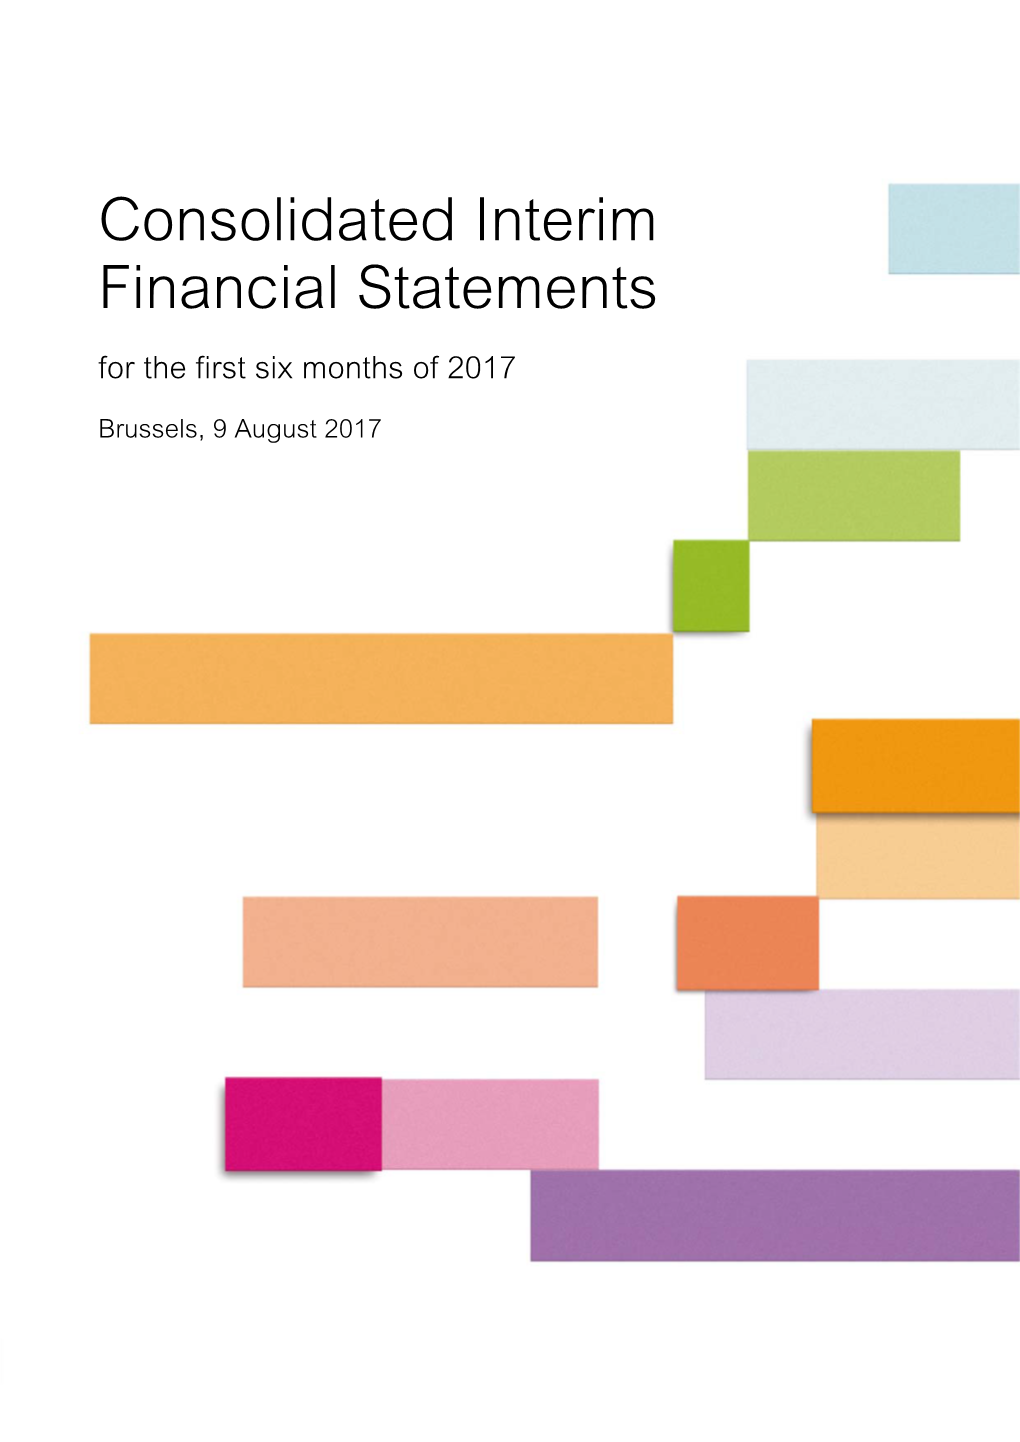 Consolidated Interim Financial Statements for the First Six Months of 2017